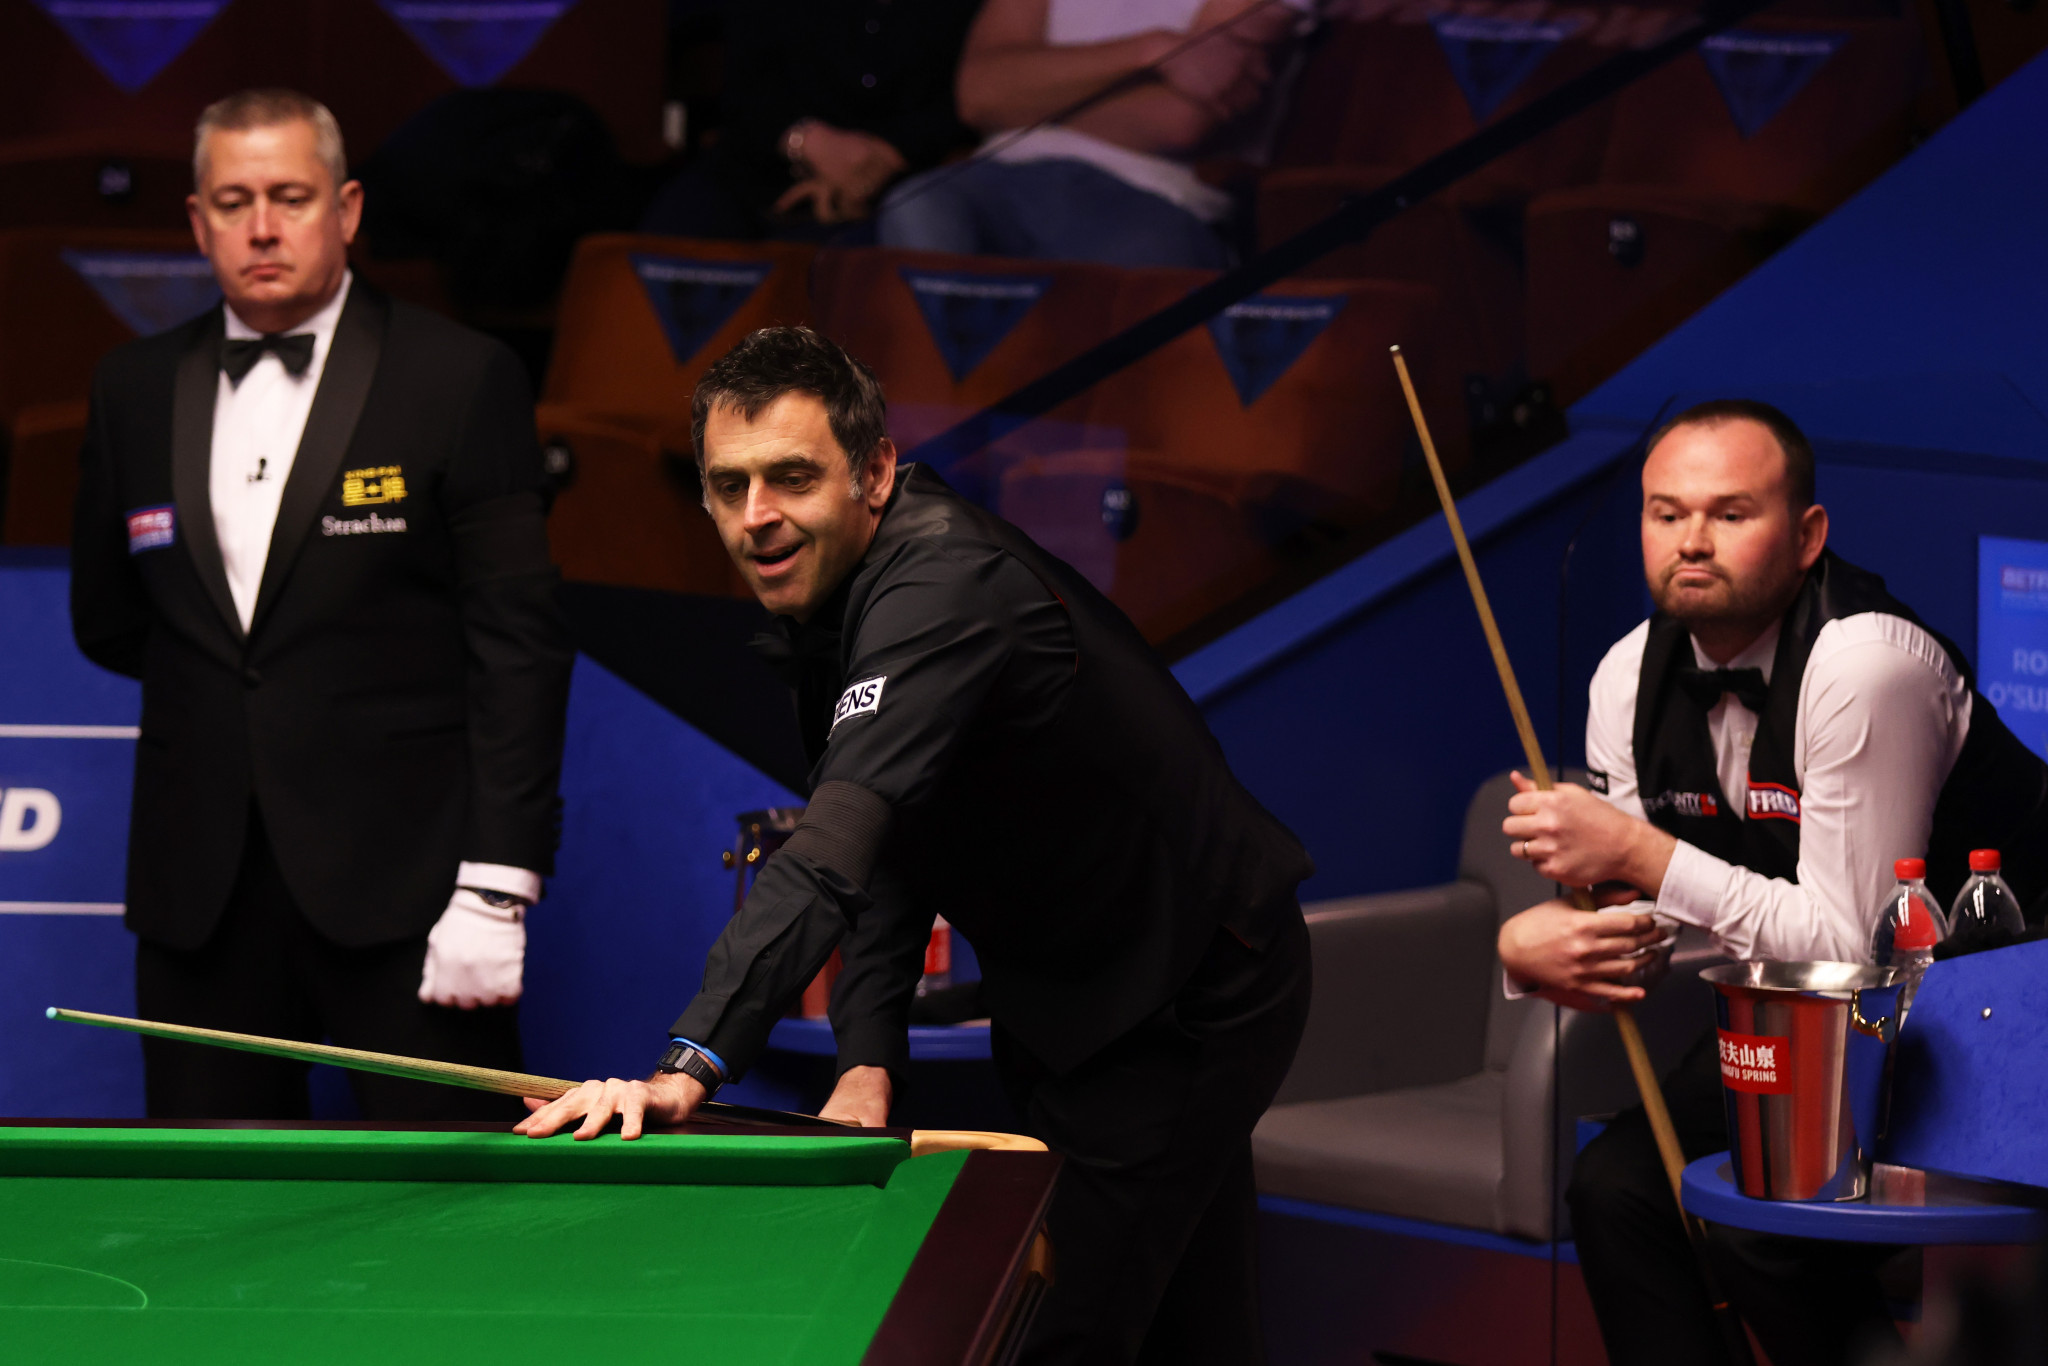 Defending champion O'Sullivan reaches round two of World Snooker